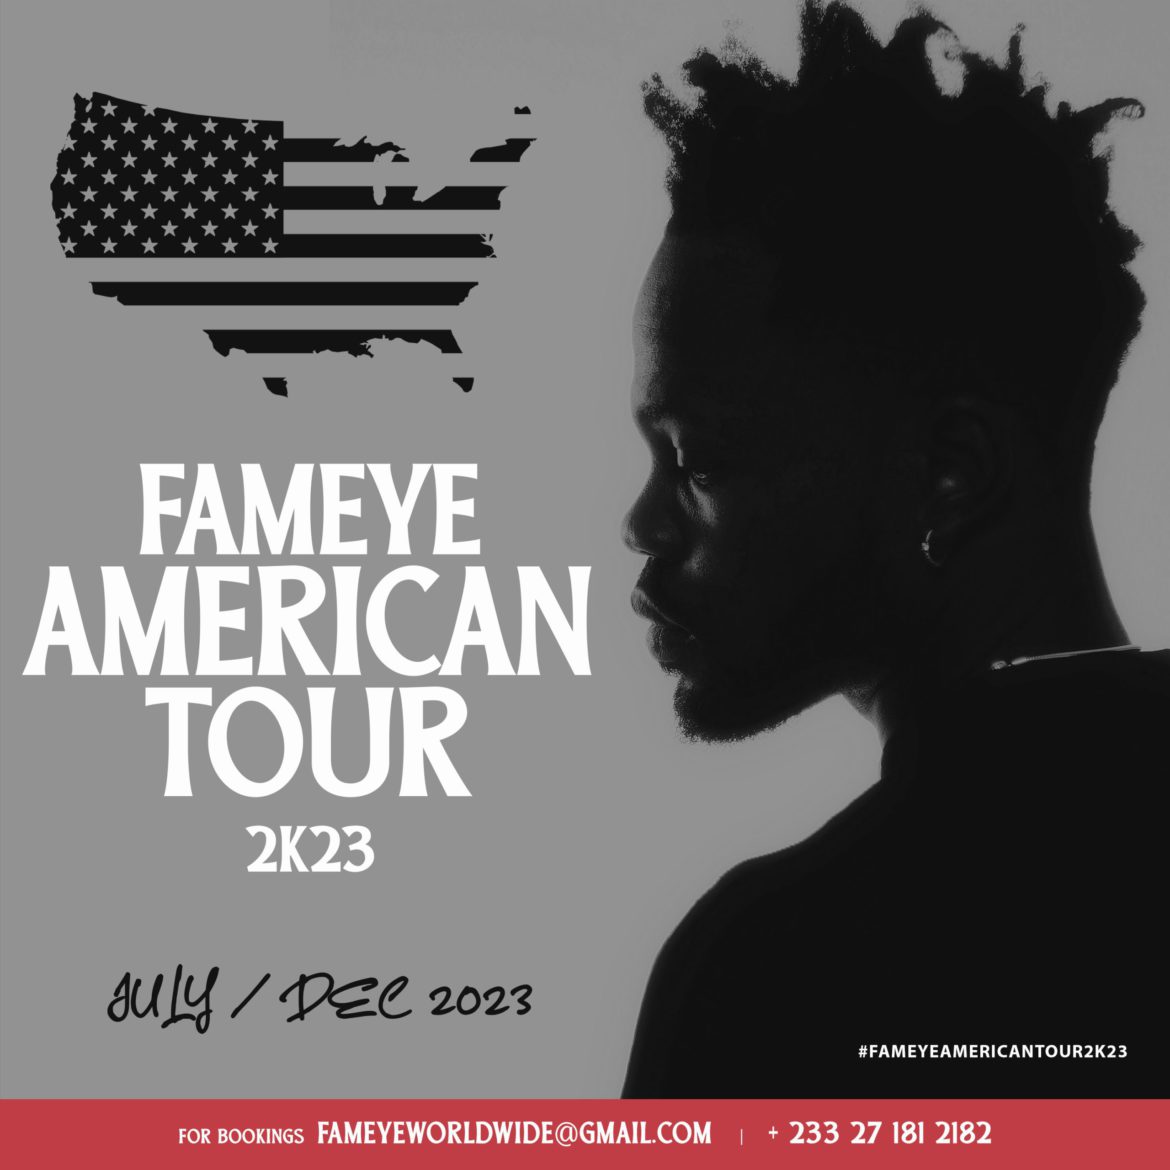 Fameye and his band Peter’s band to tour America from July to December 2023